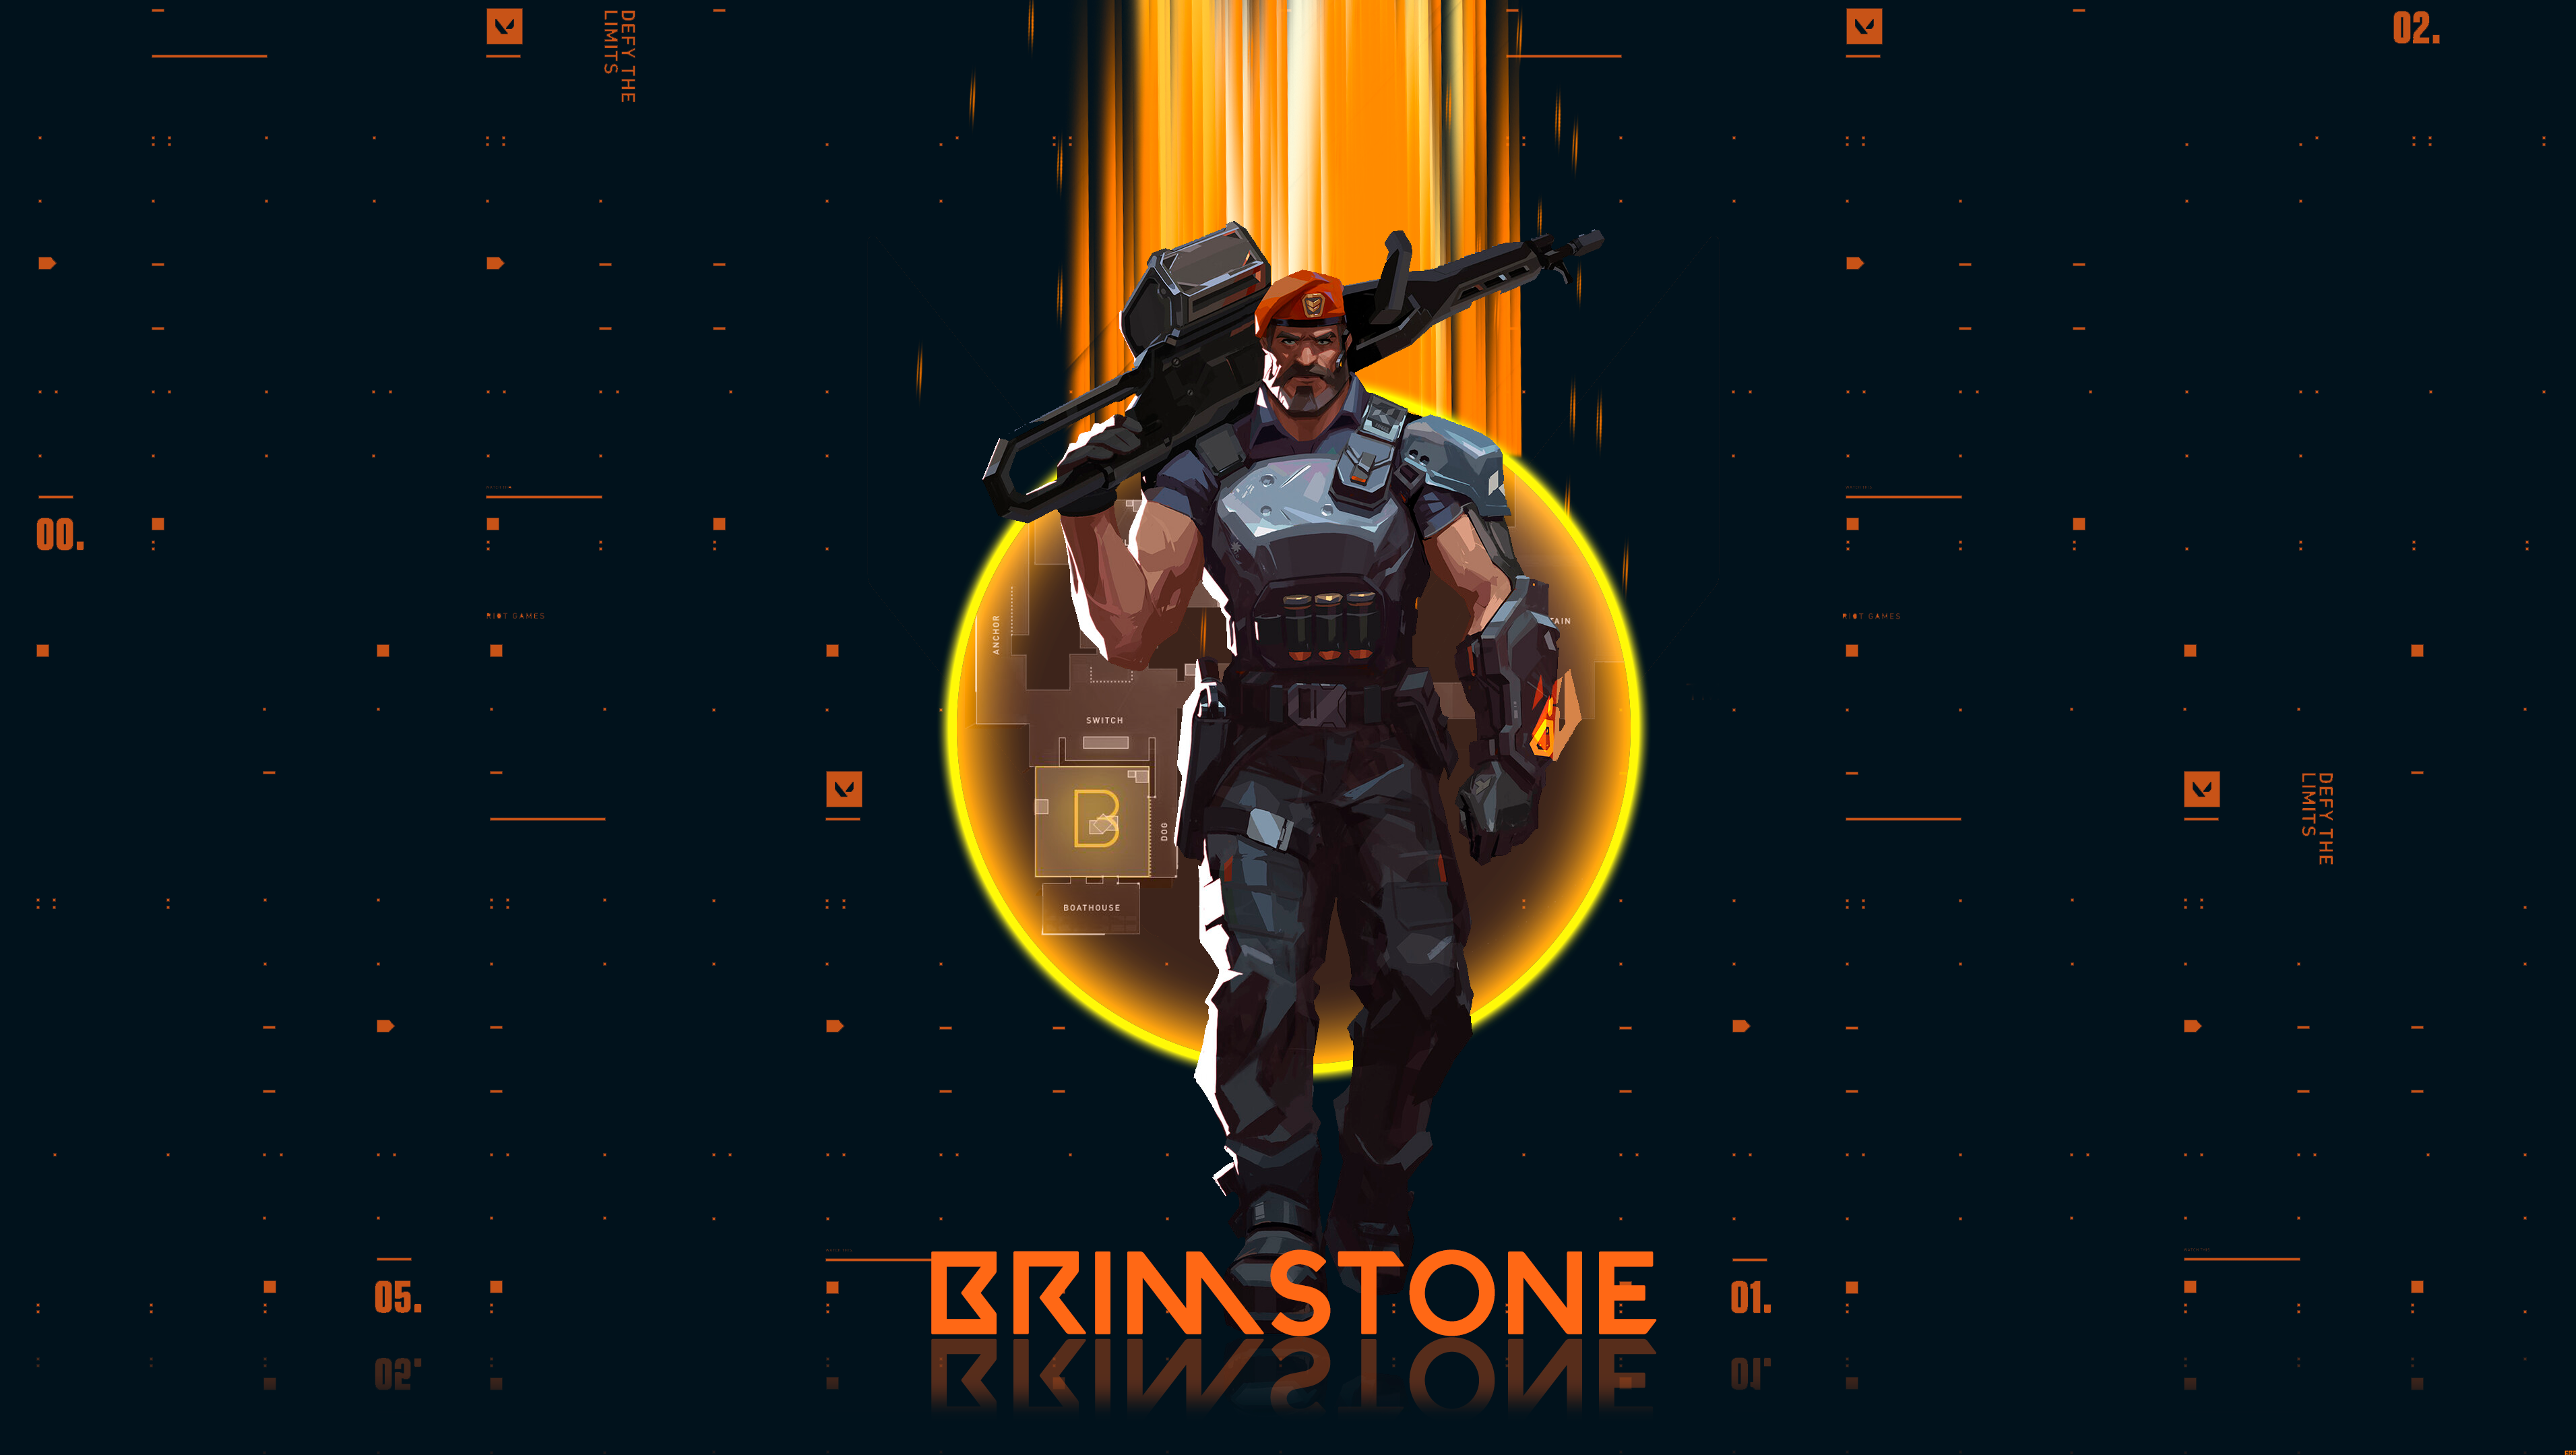 How to play Brimstone